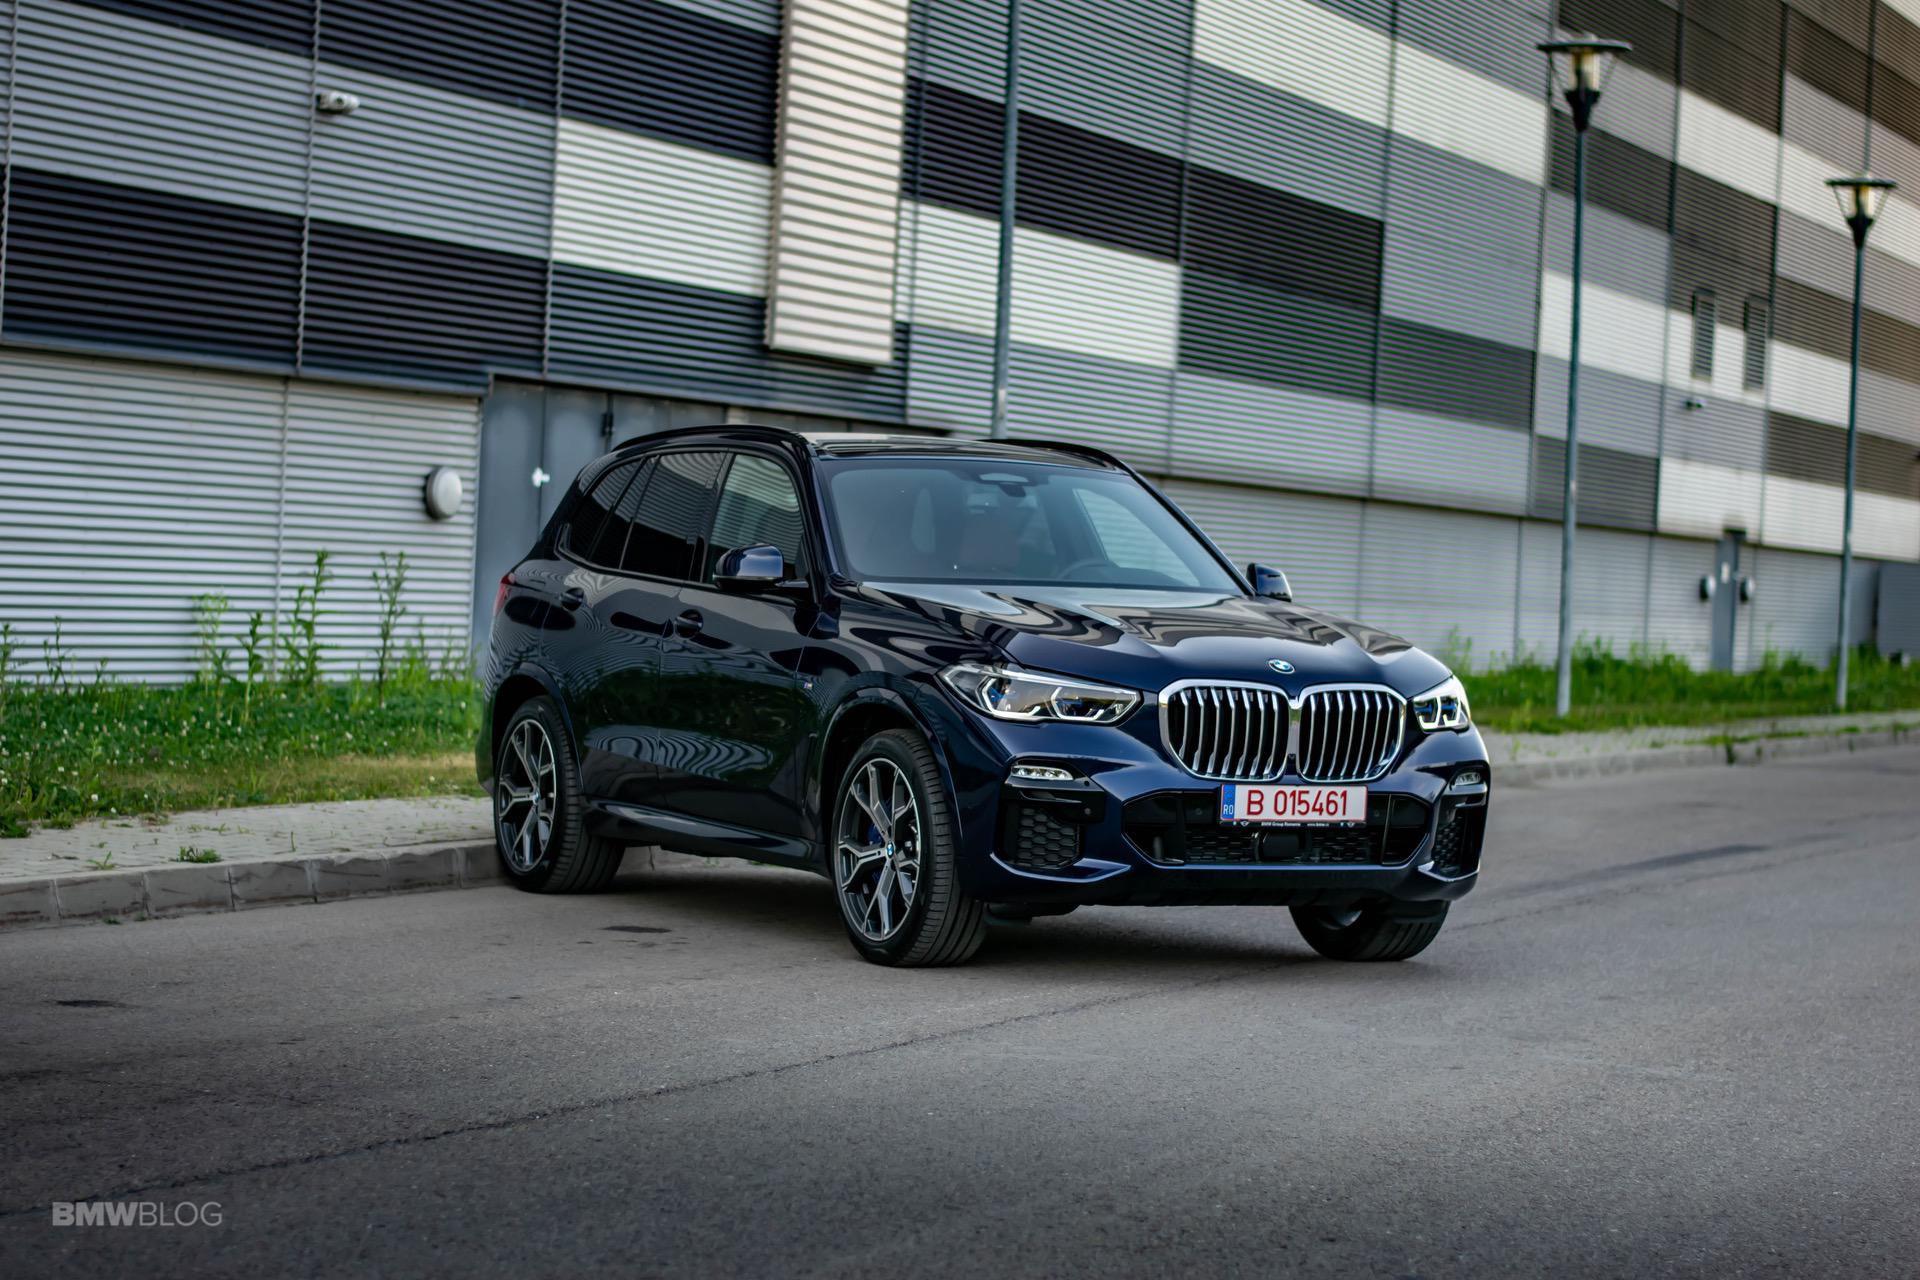 2020 BMW X5 xDrive45e Review – The New Best Buy